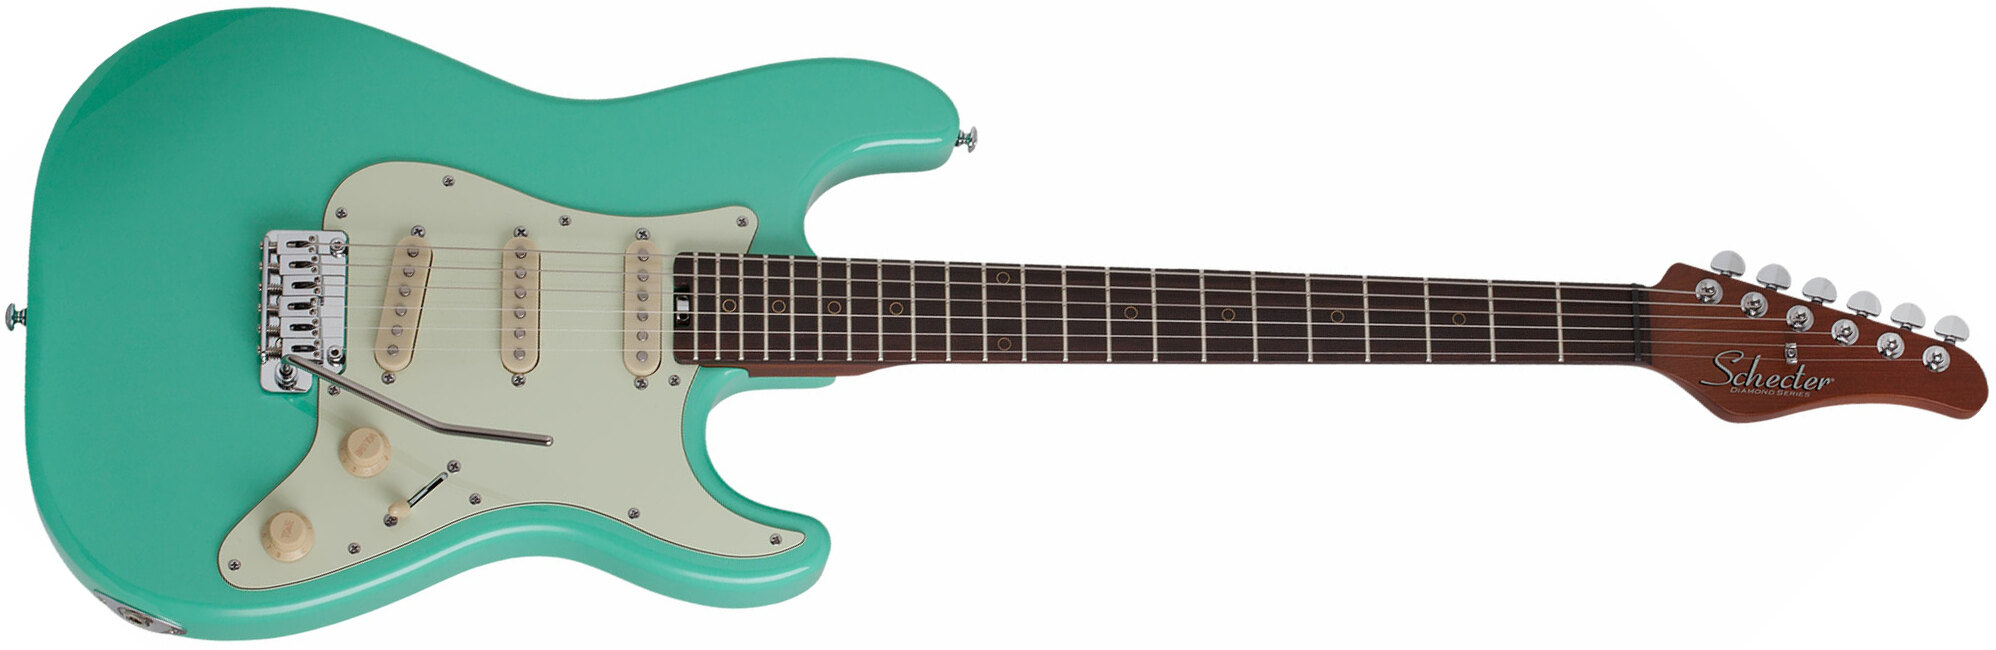 Schecter Nick Johnston Traditional Signature 3s Trem Eb - Atomic Green - Str shape electric guitar - Main picture